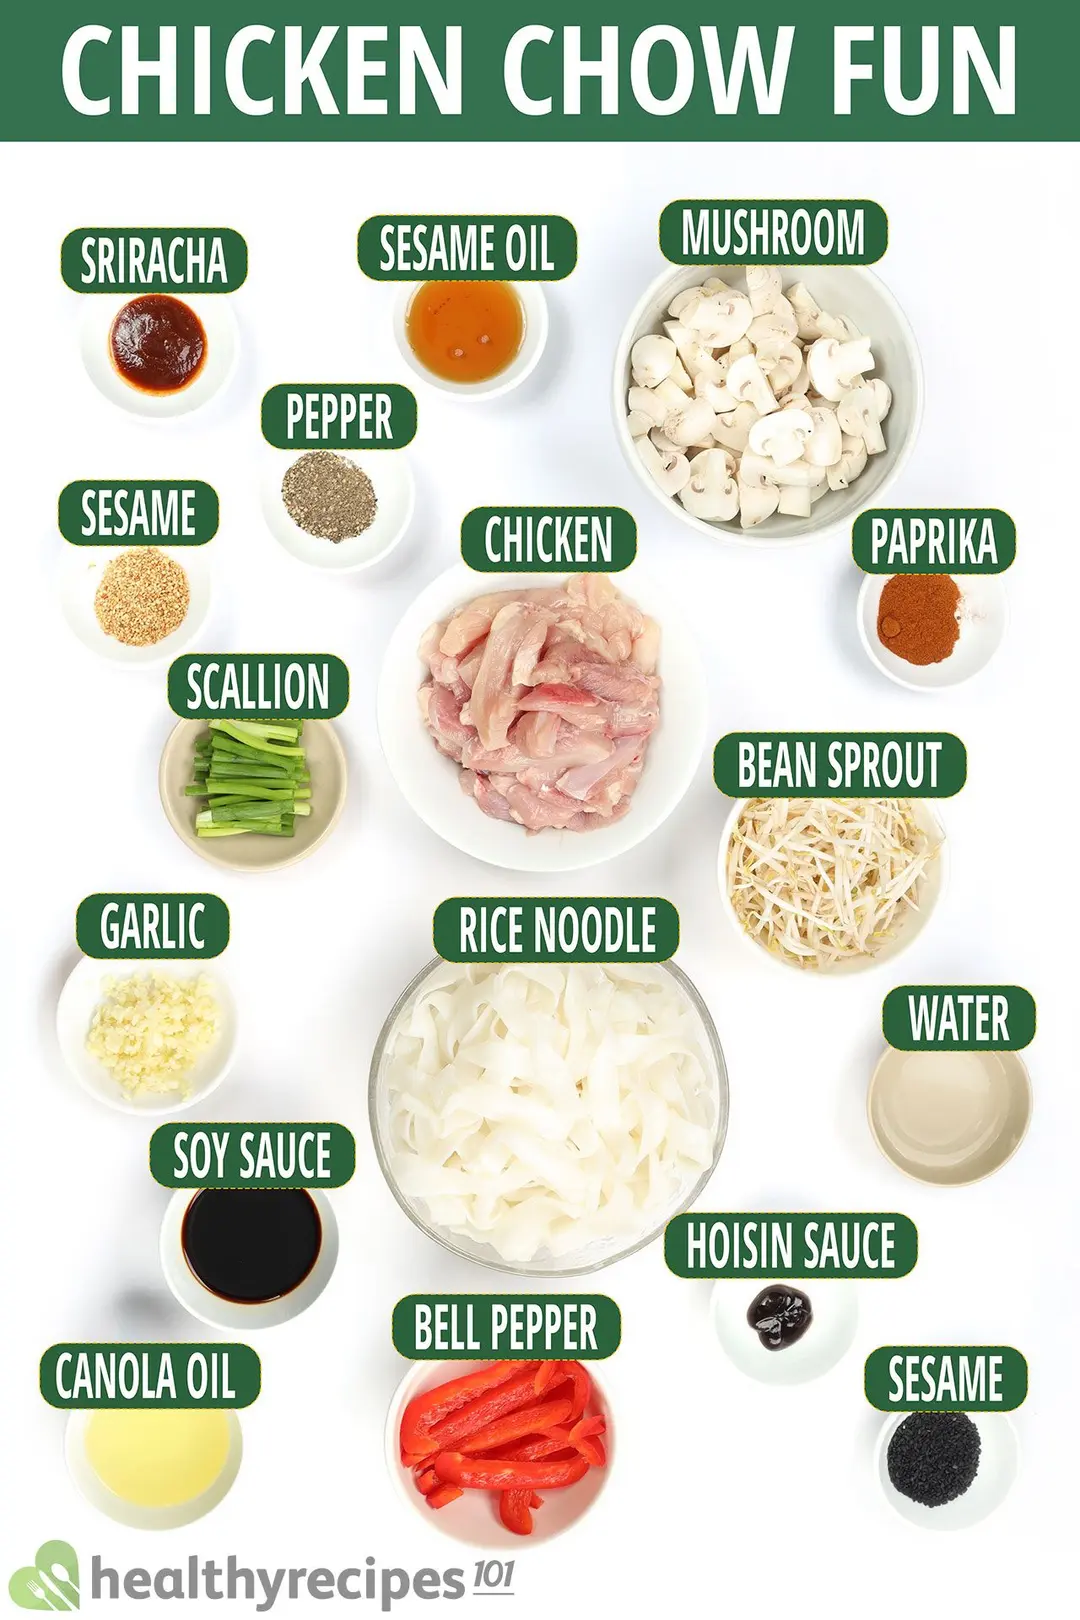 Ingredients for chicken chow fun: chicken thighs, rice noodles, vegetables, and seasonings